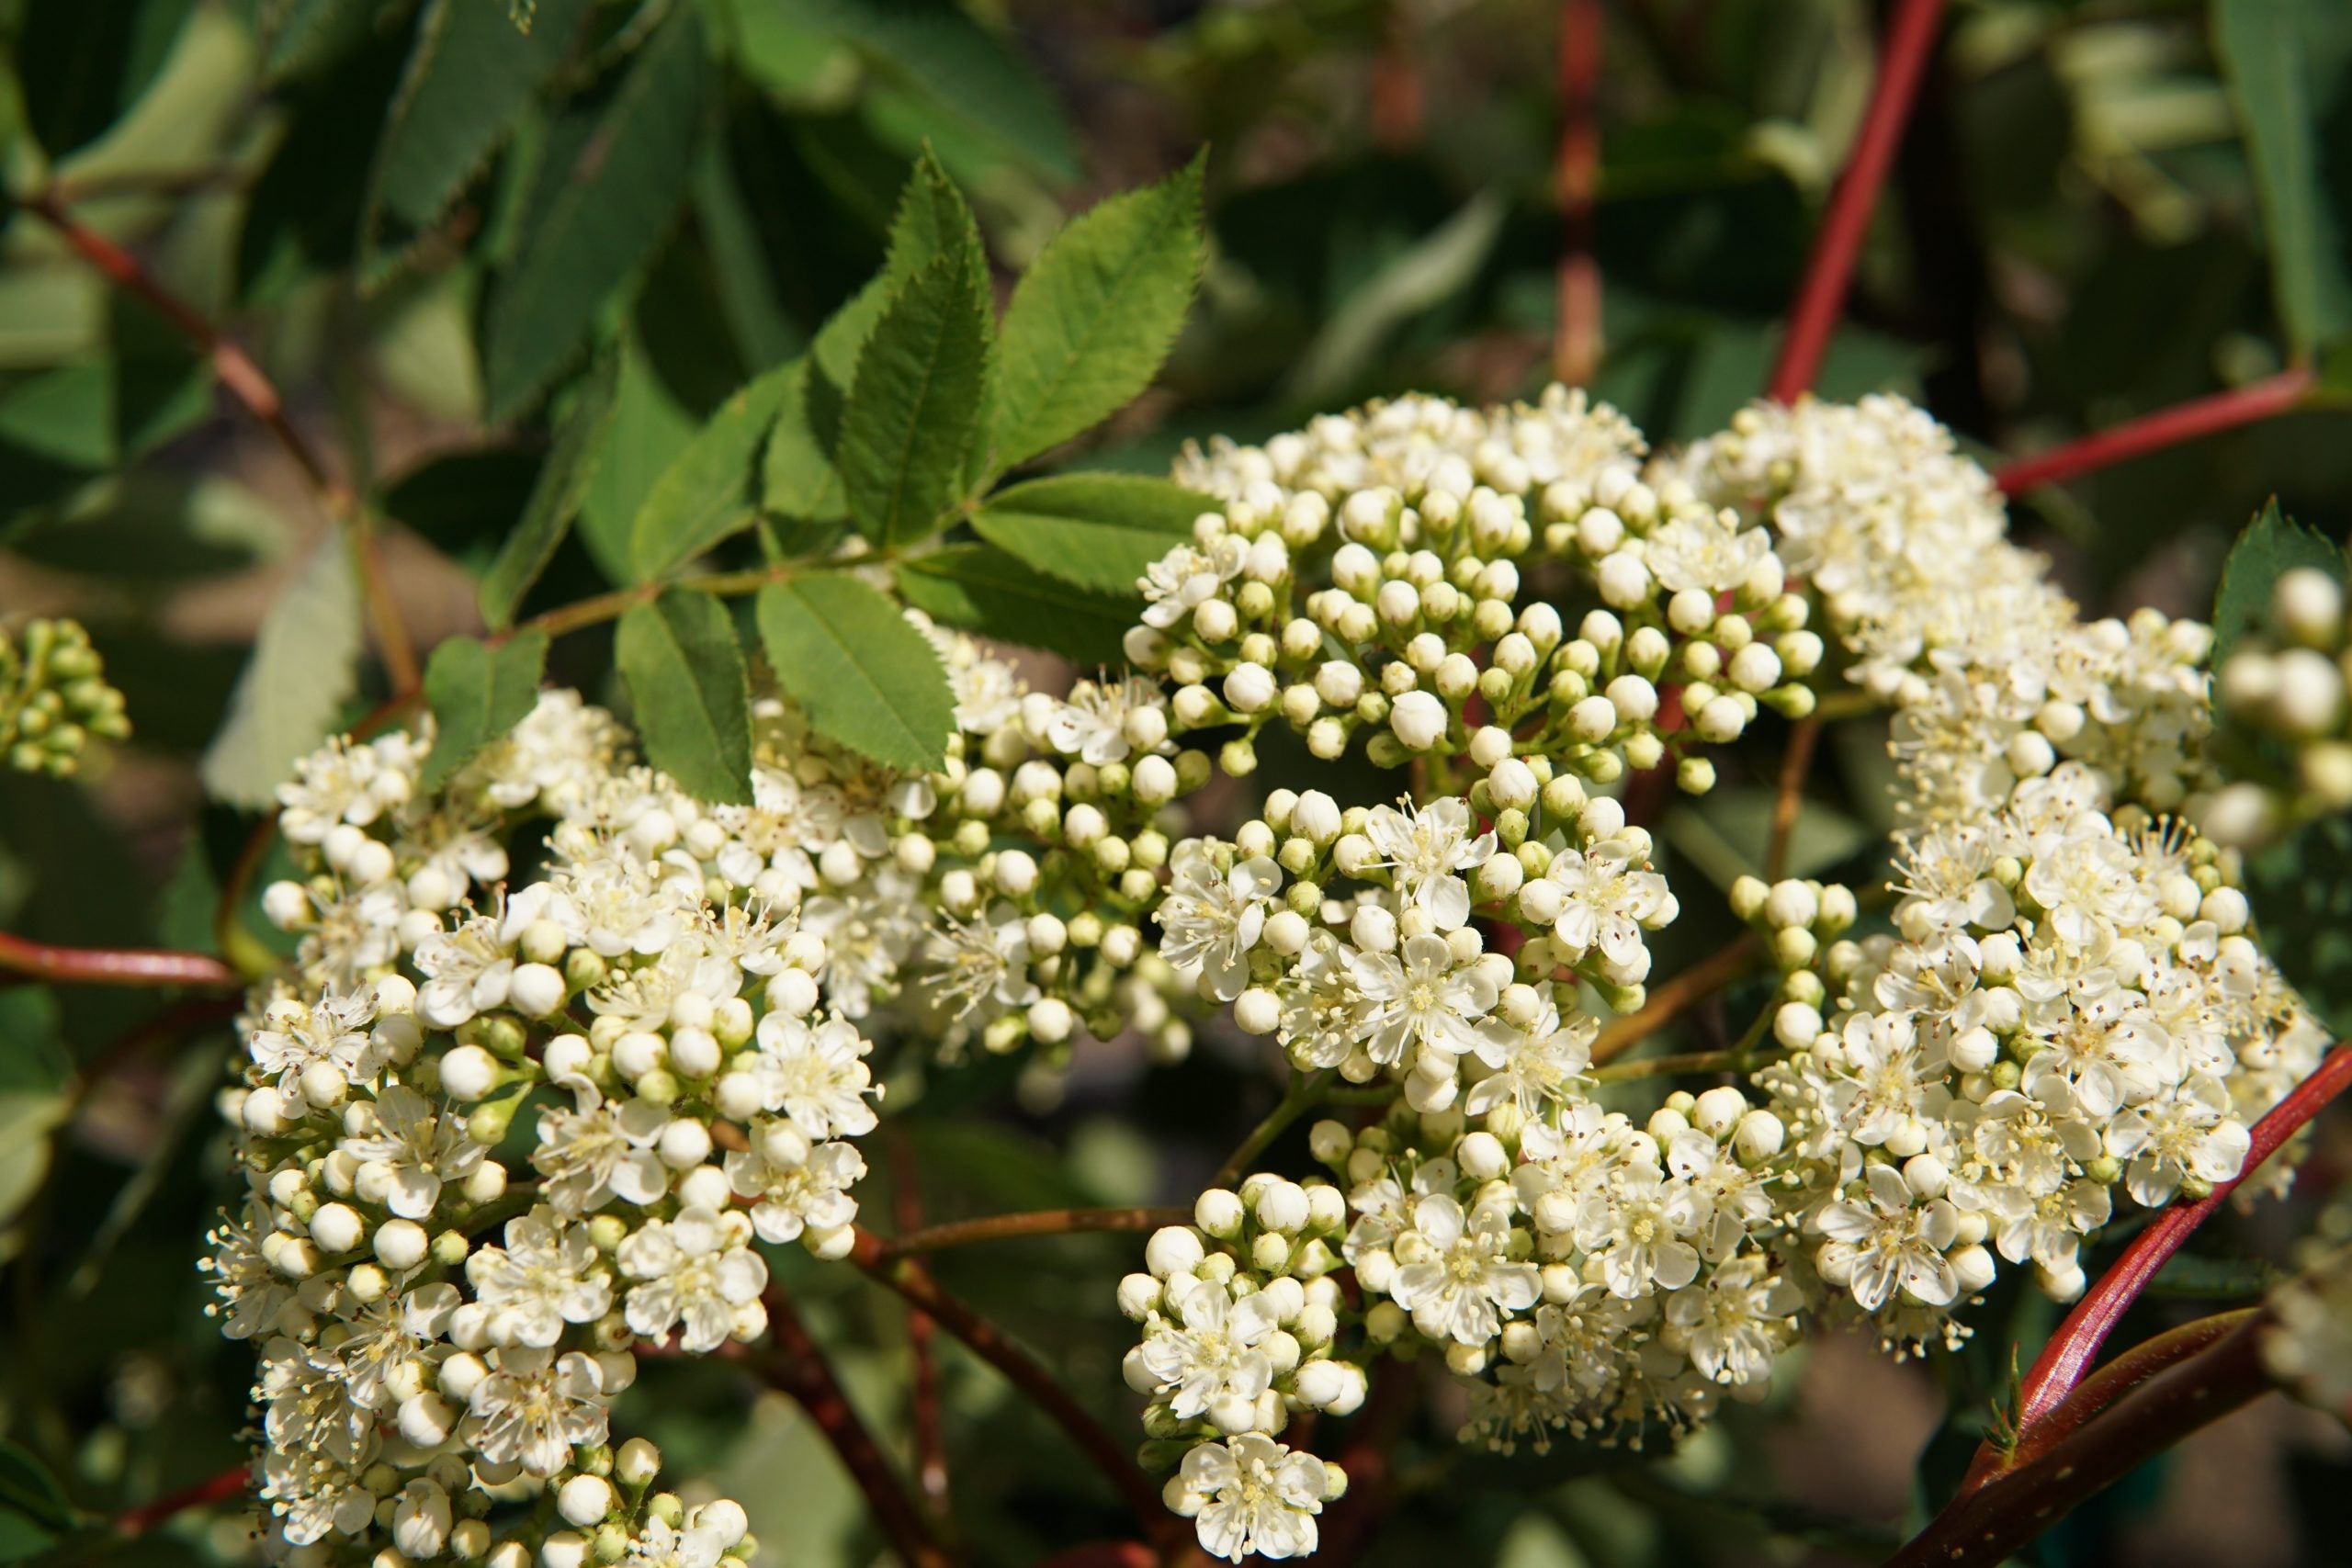 American Ash flowers that start with a